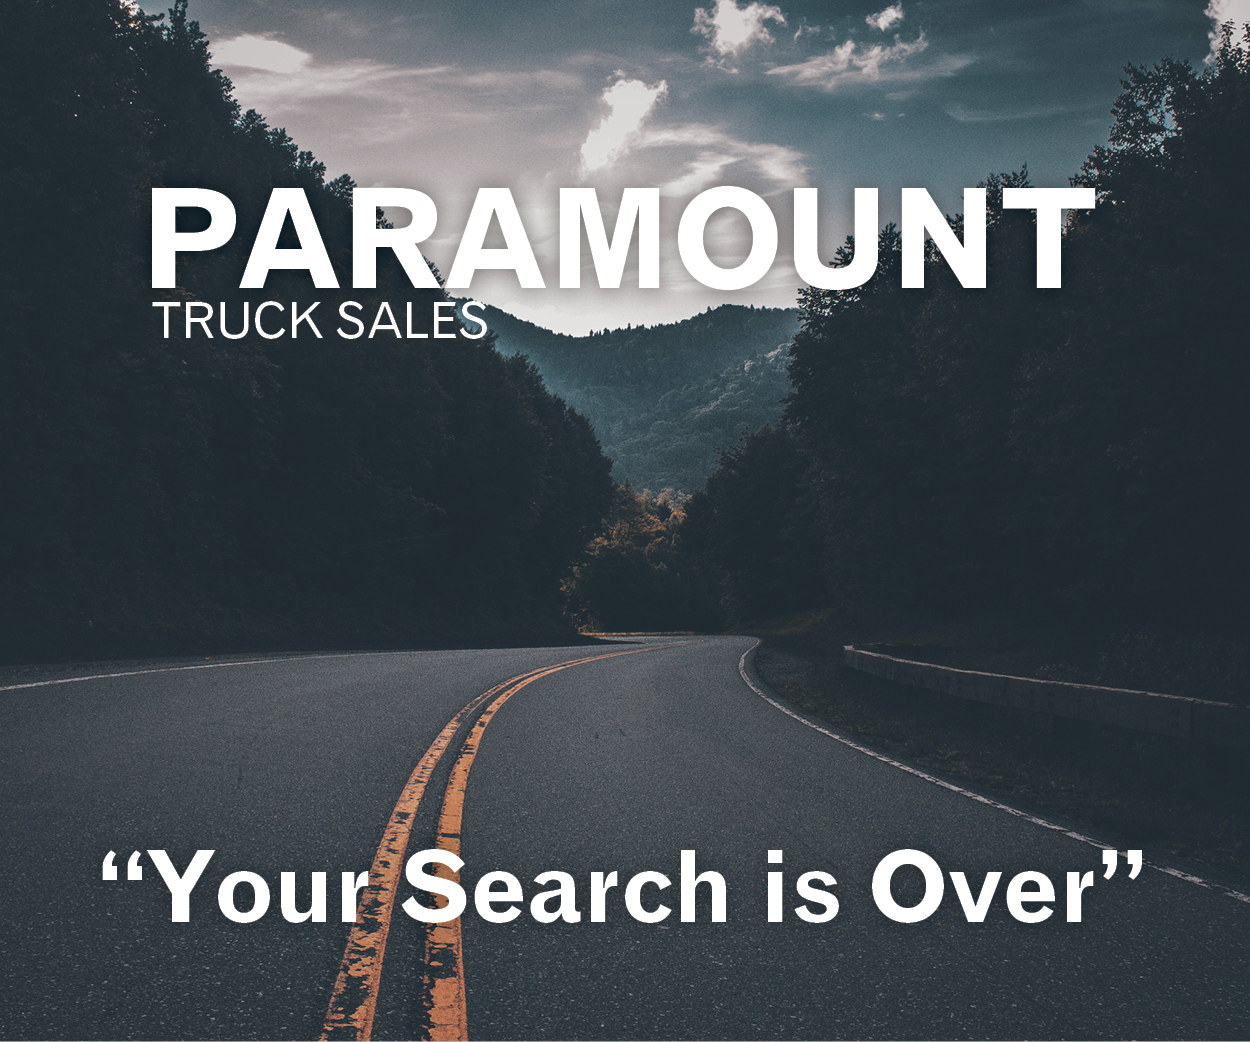 More from Paramount Truck Sales